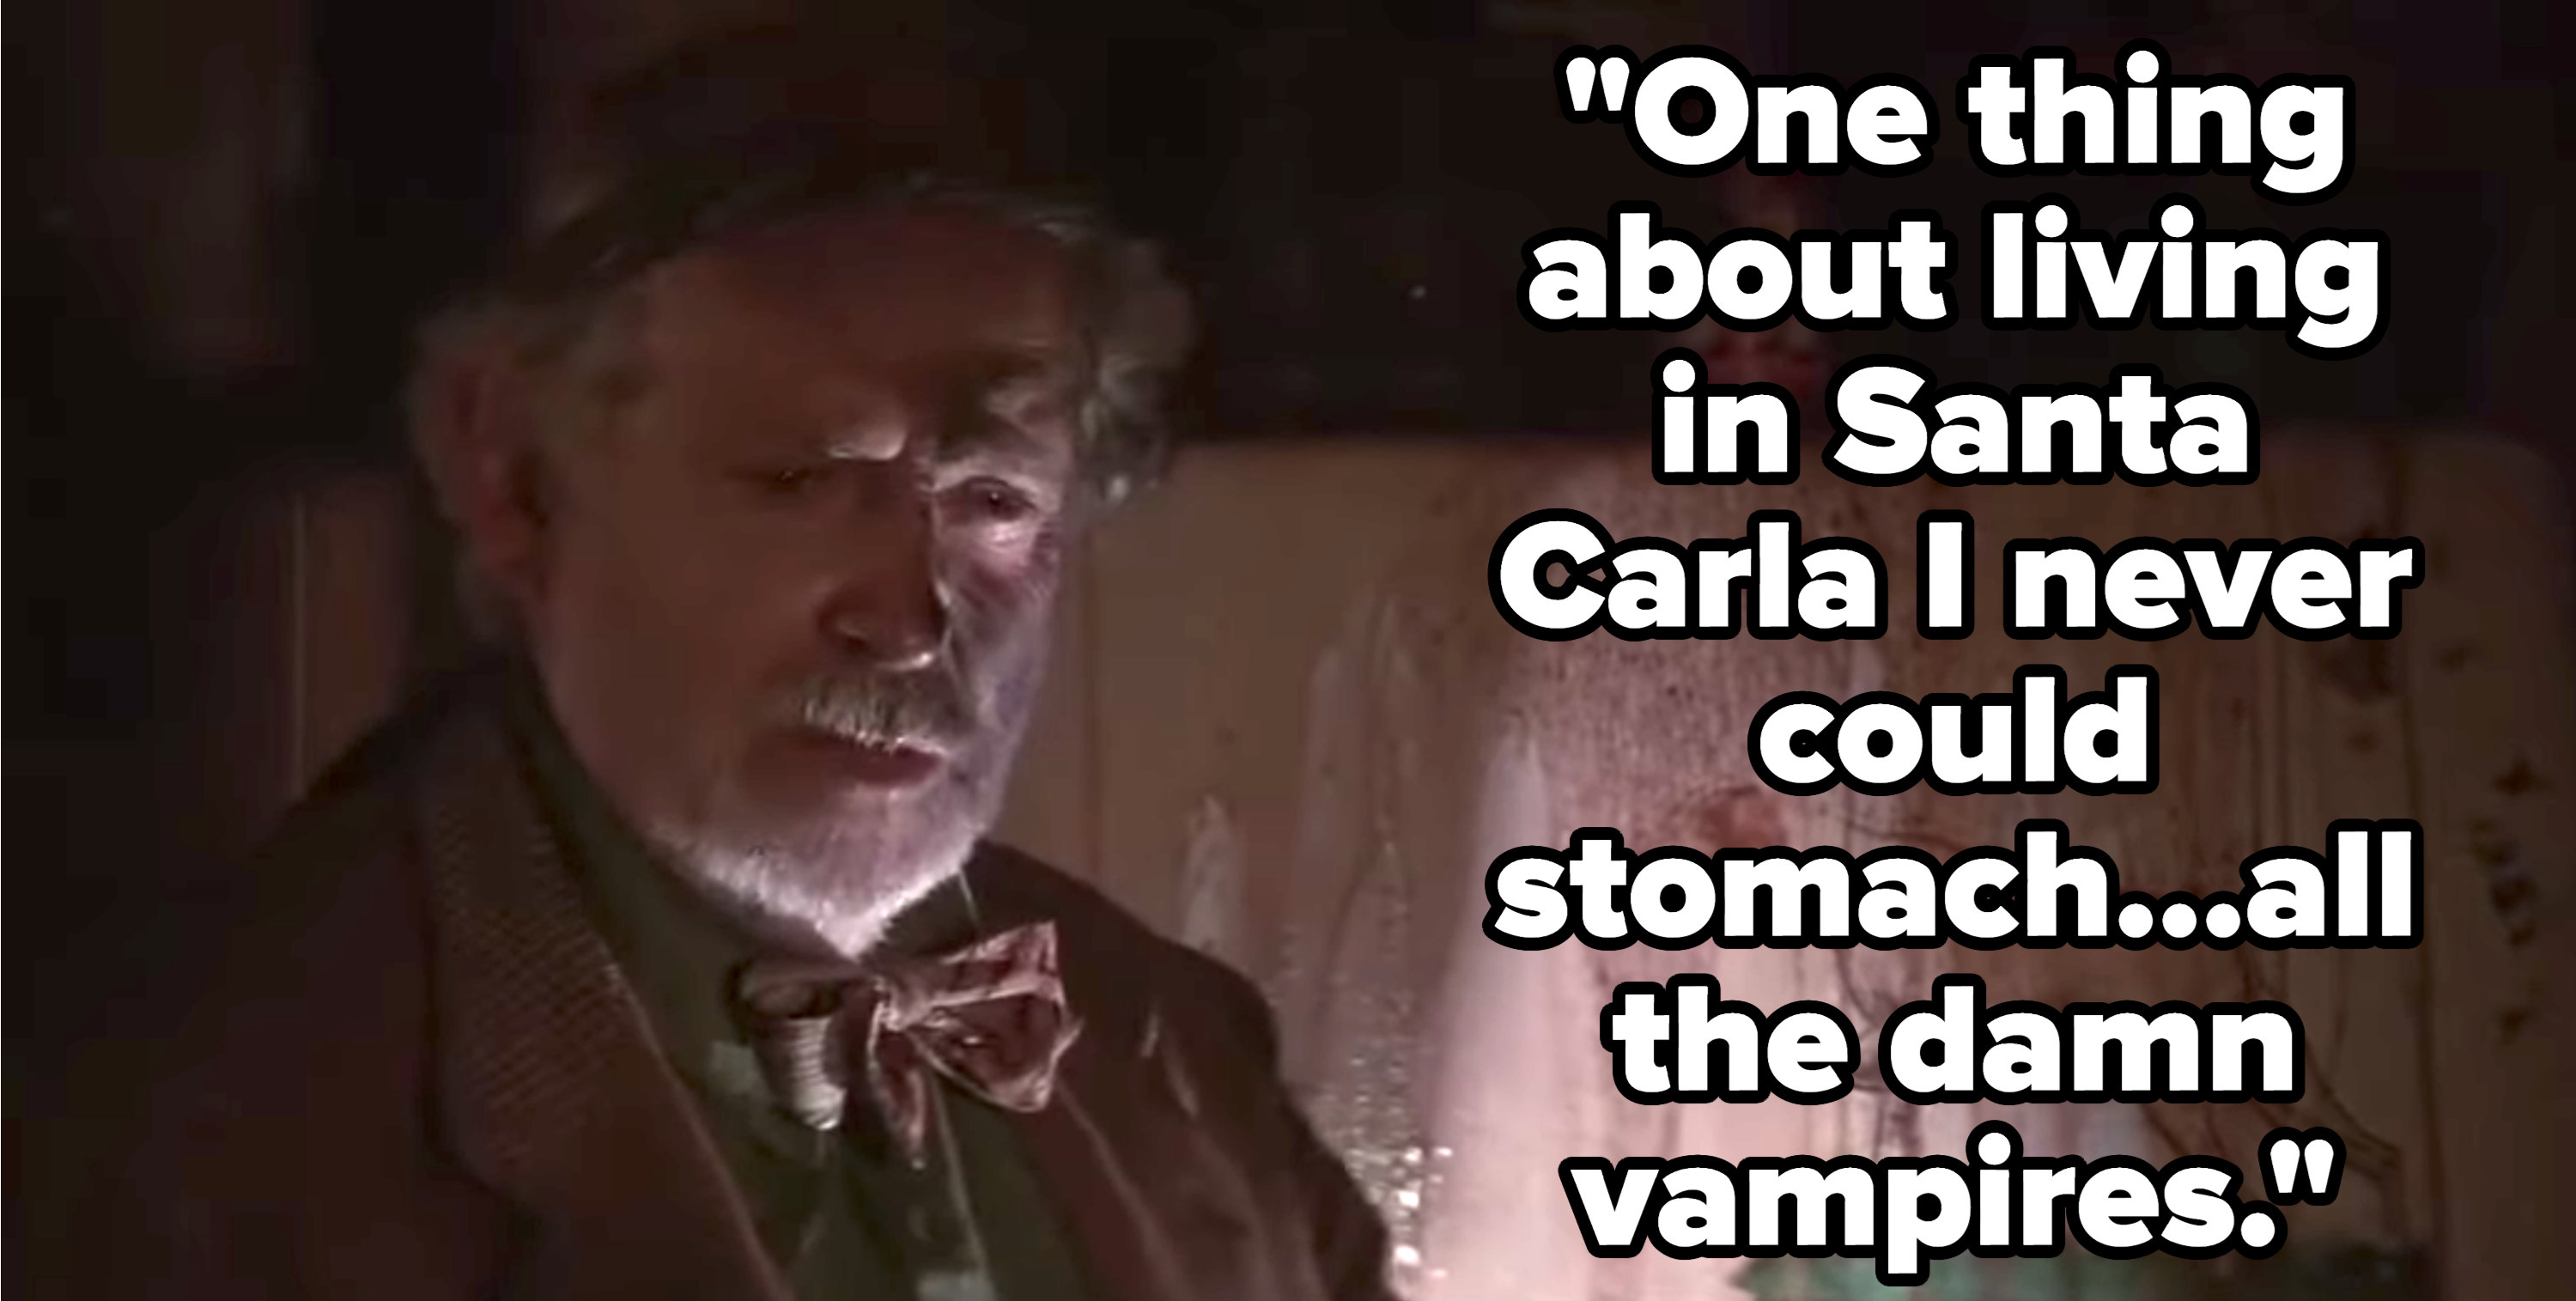 Grandpa says, &quot;One thing about living in Santa Carla I never could stomach...all the damn vampires&quot;